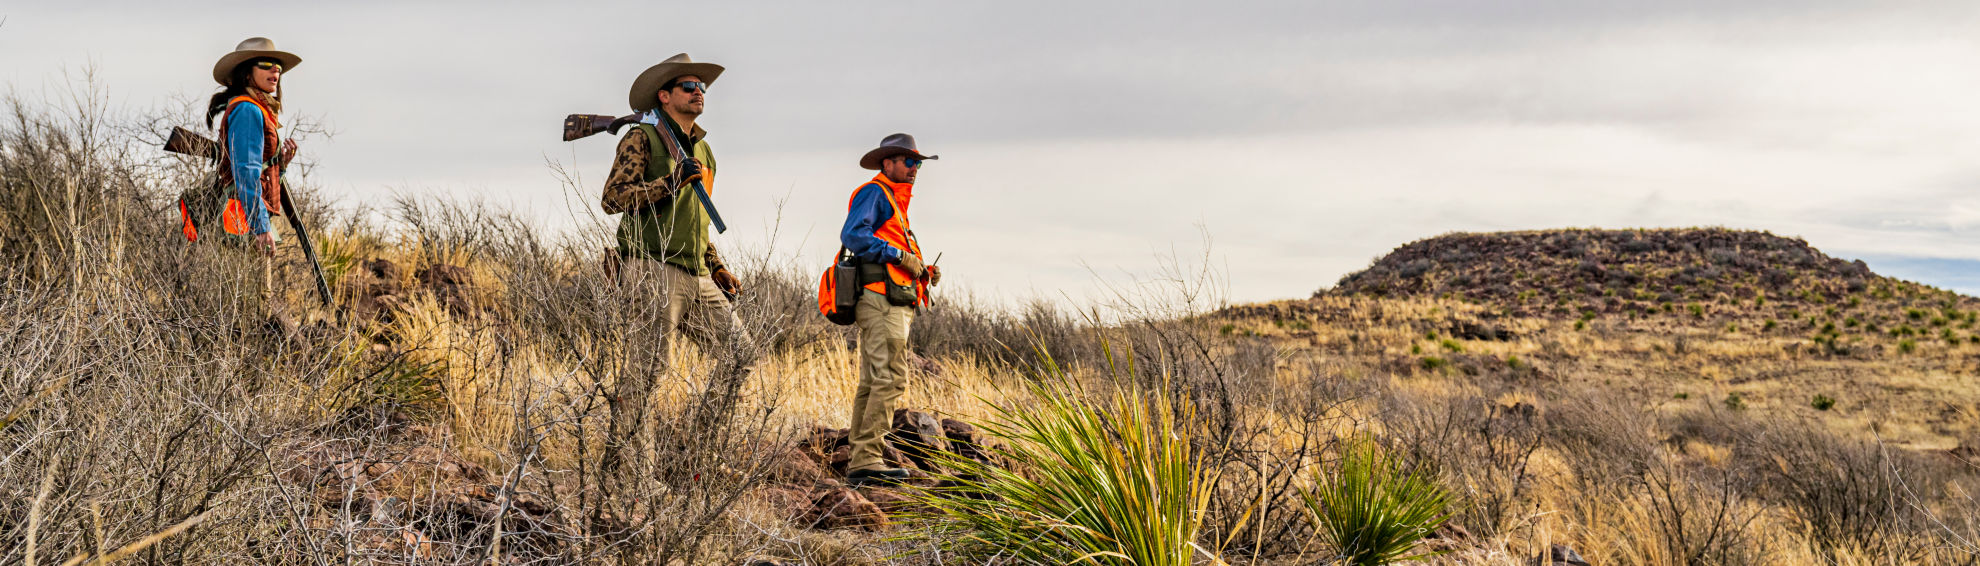 Three wingshooters in blaze orange hunting vests walk through a field of dry grass.